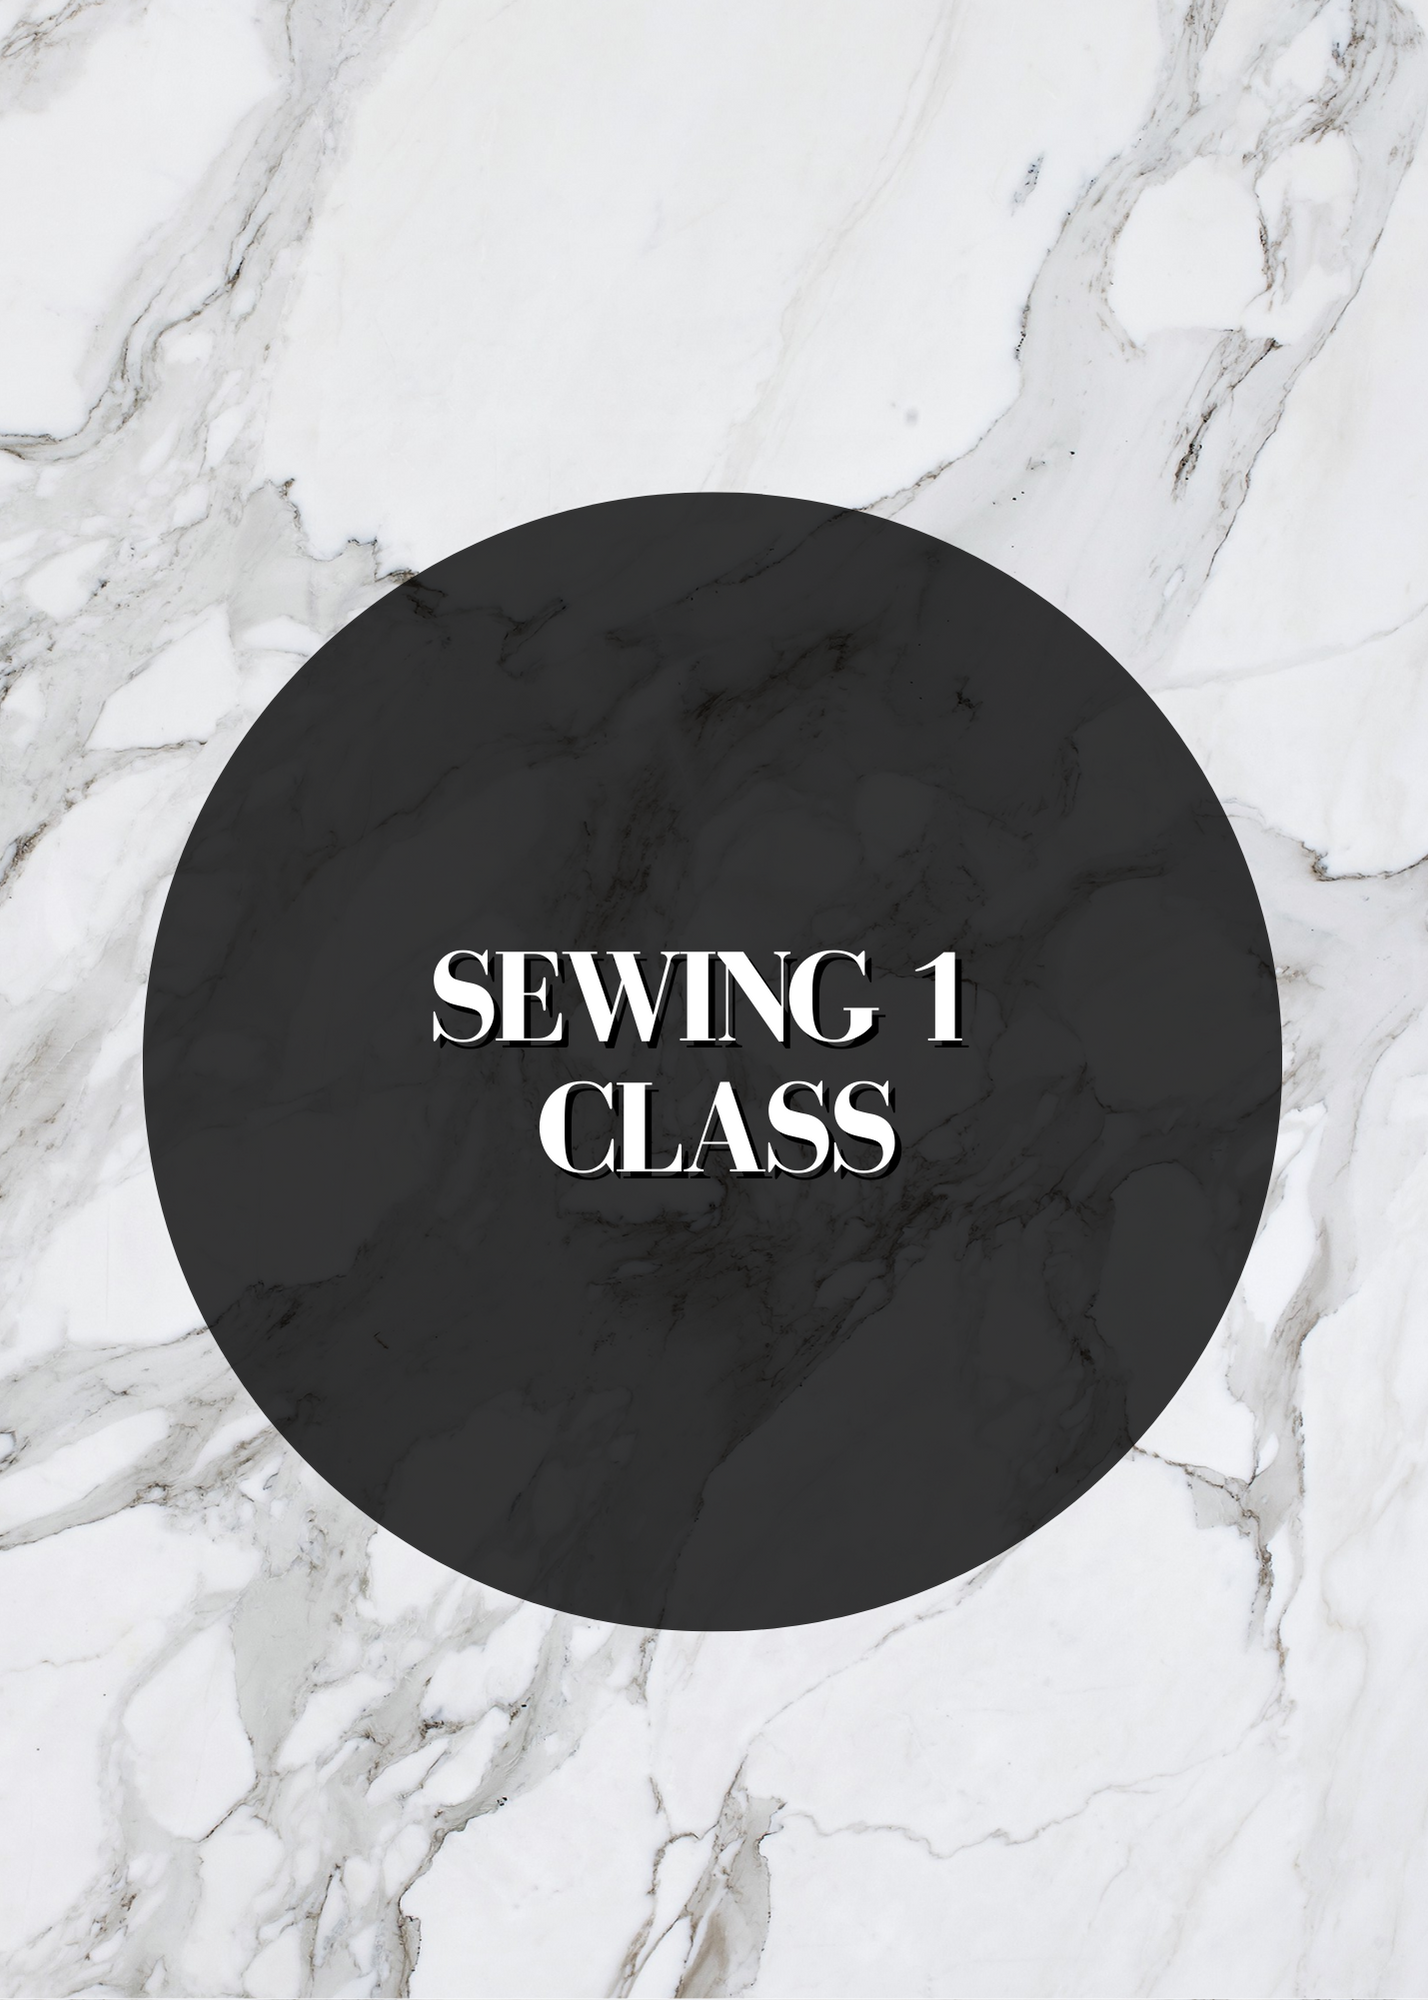 Construction: Sewing 1